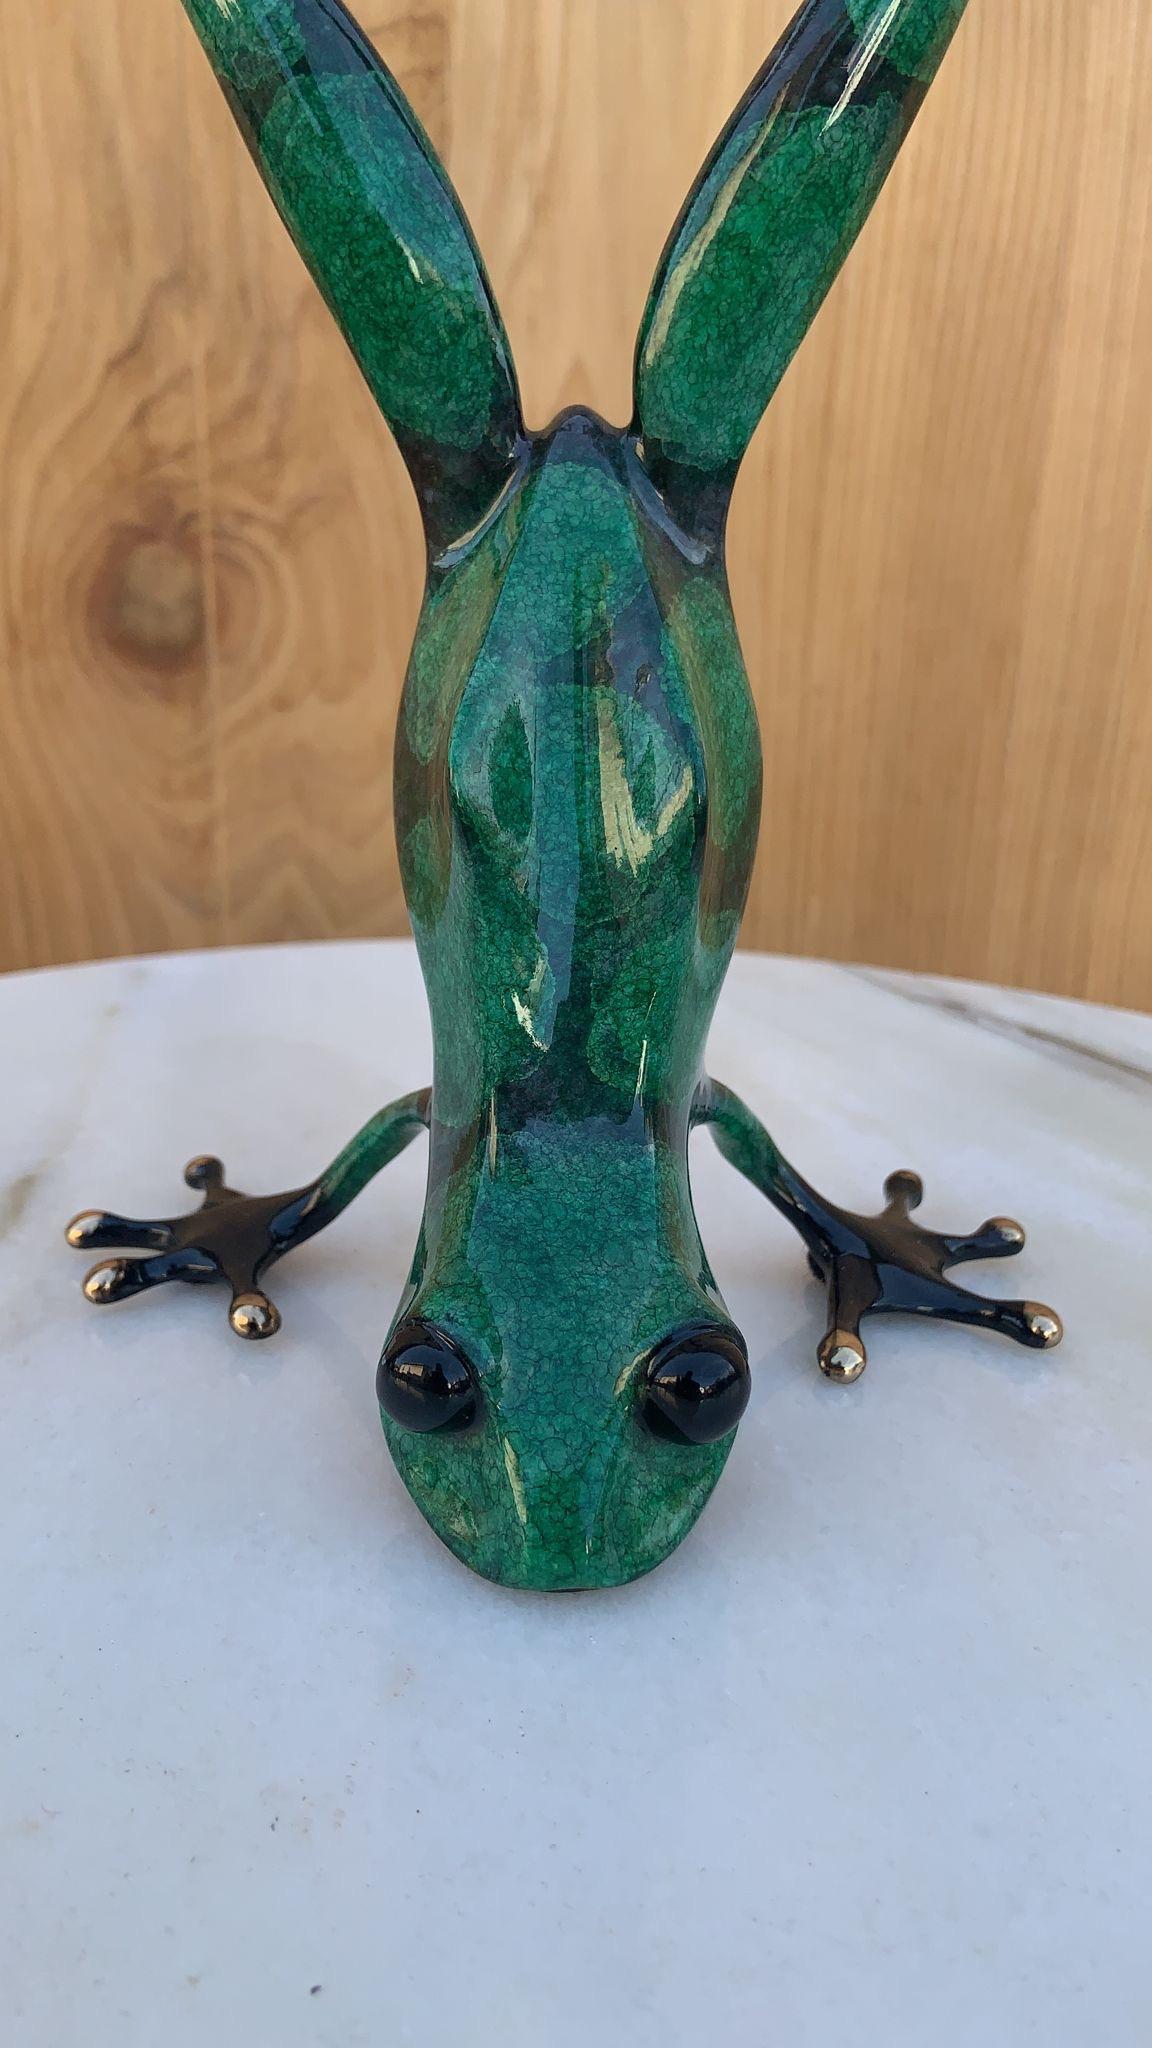 American Vintage Bronze Frog Show Off by Frogman Artist Tim Cotterill